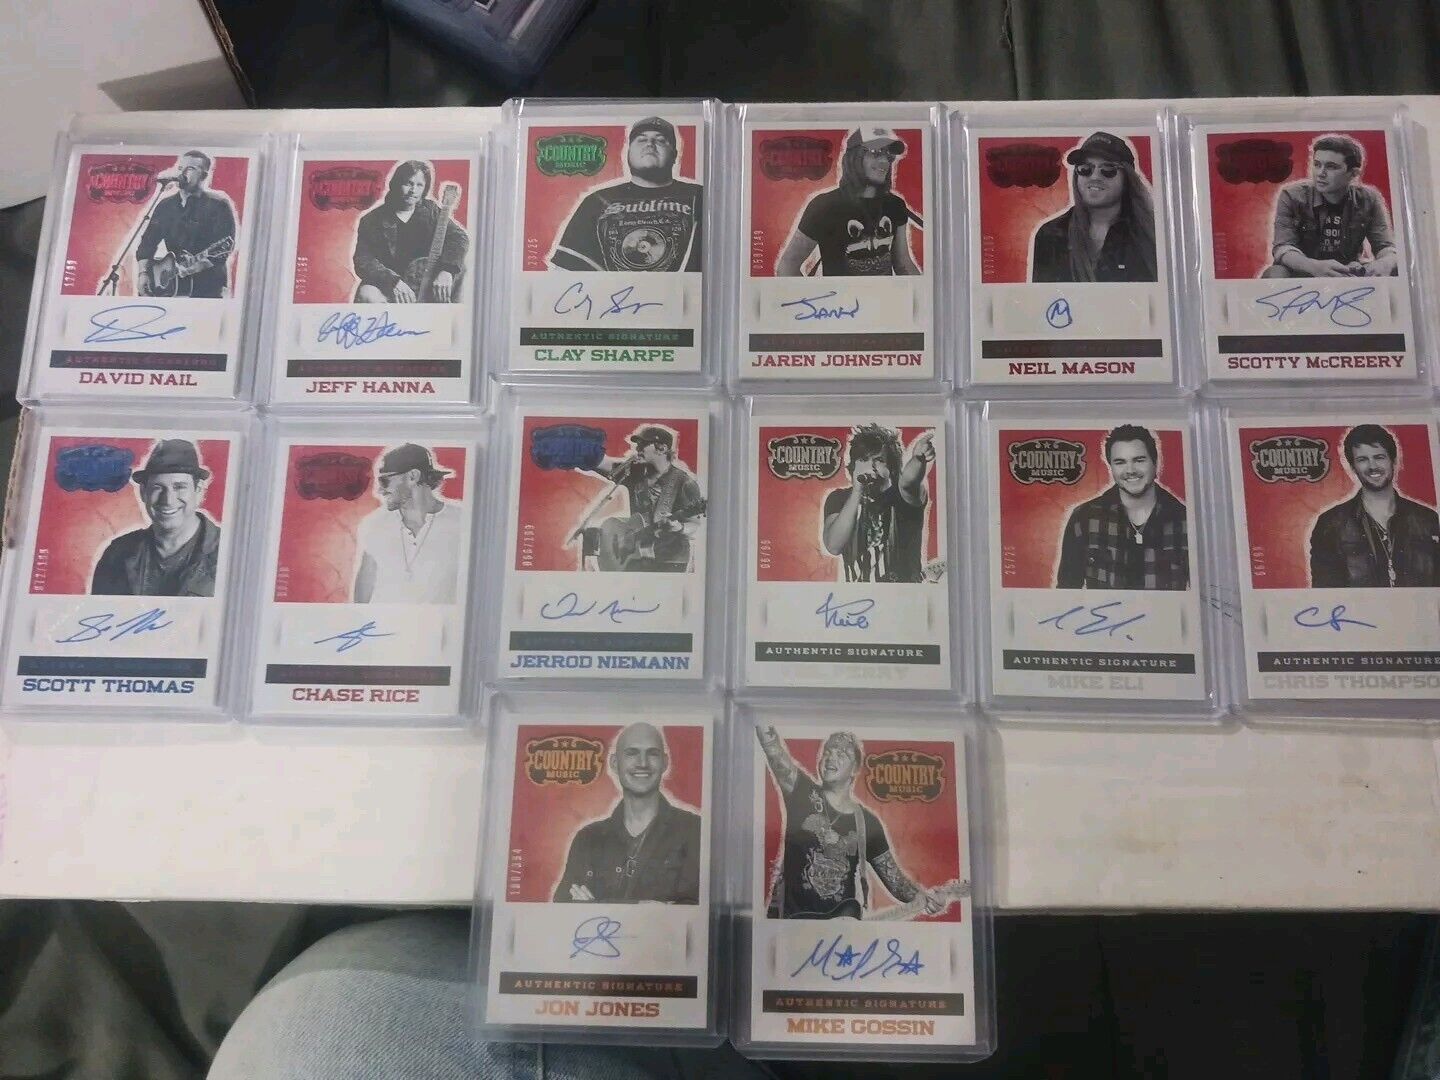 2014 Panini Country Music Autograph Card Lot